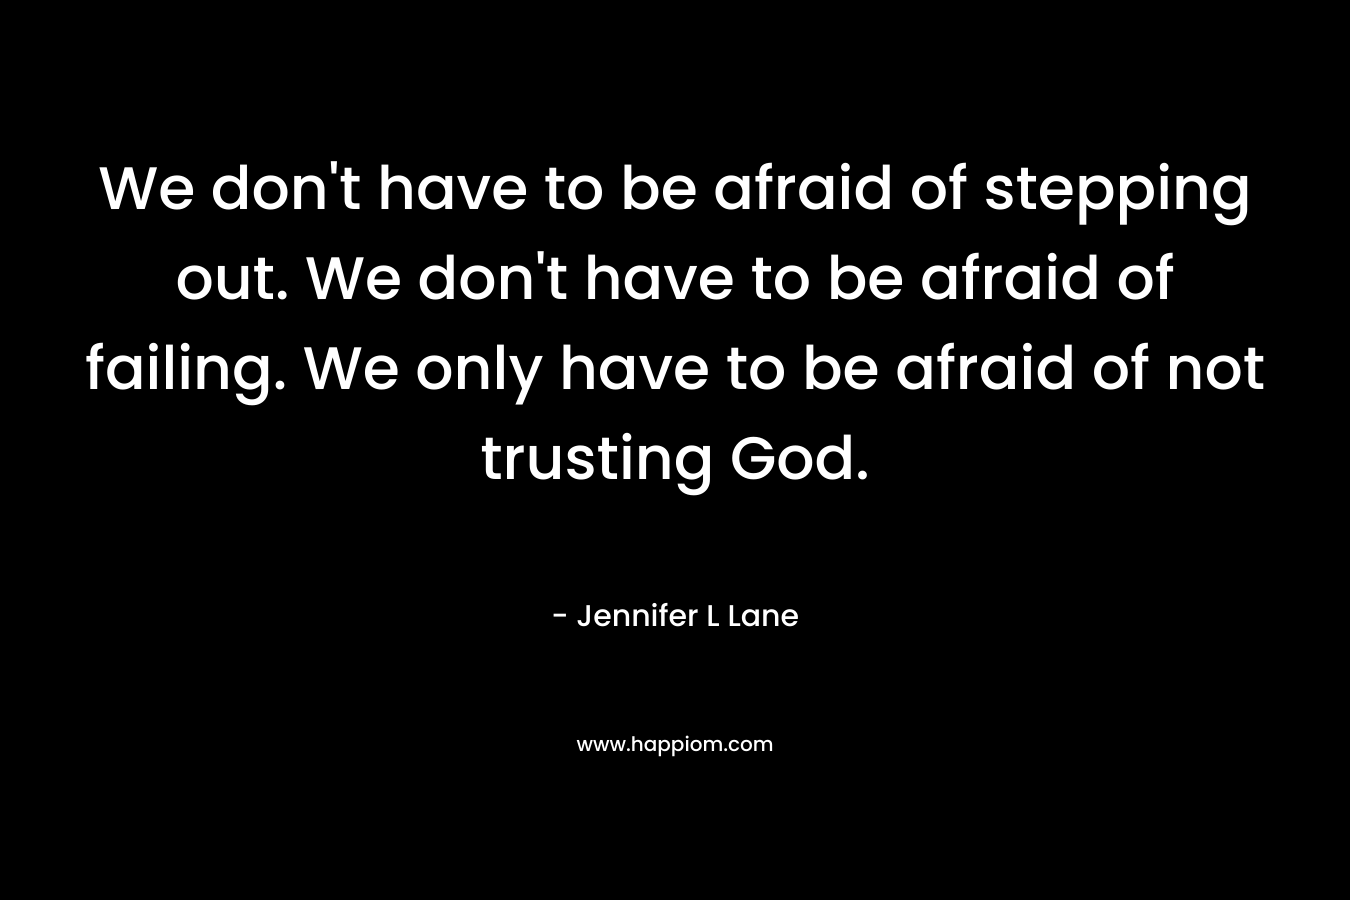 We don’t have to be afraid of stepping out. We don’t have to be afraid of failing. We only have to be afraid of not trusting God. – Jennifer L Lane